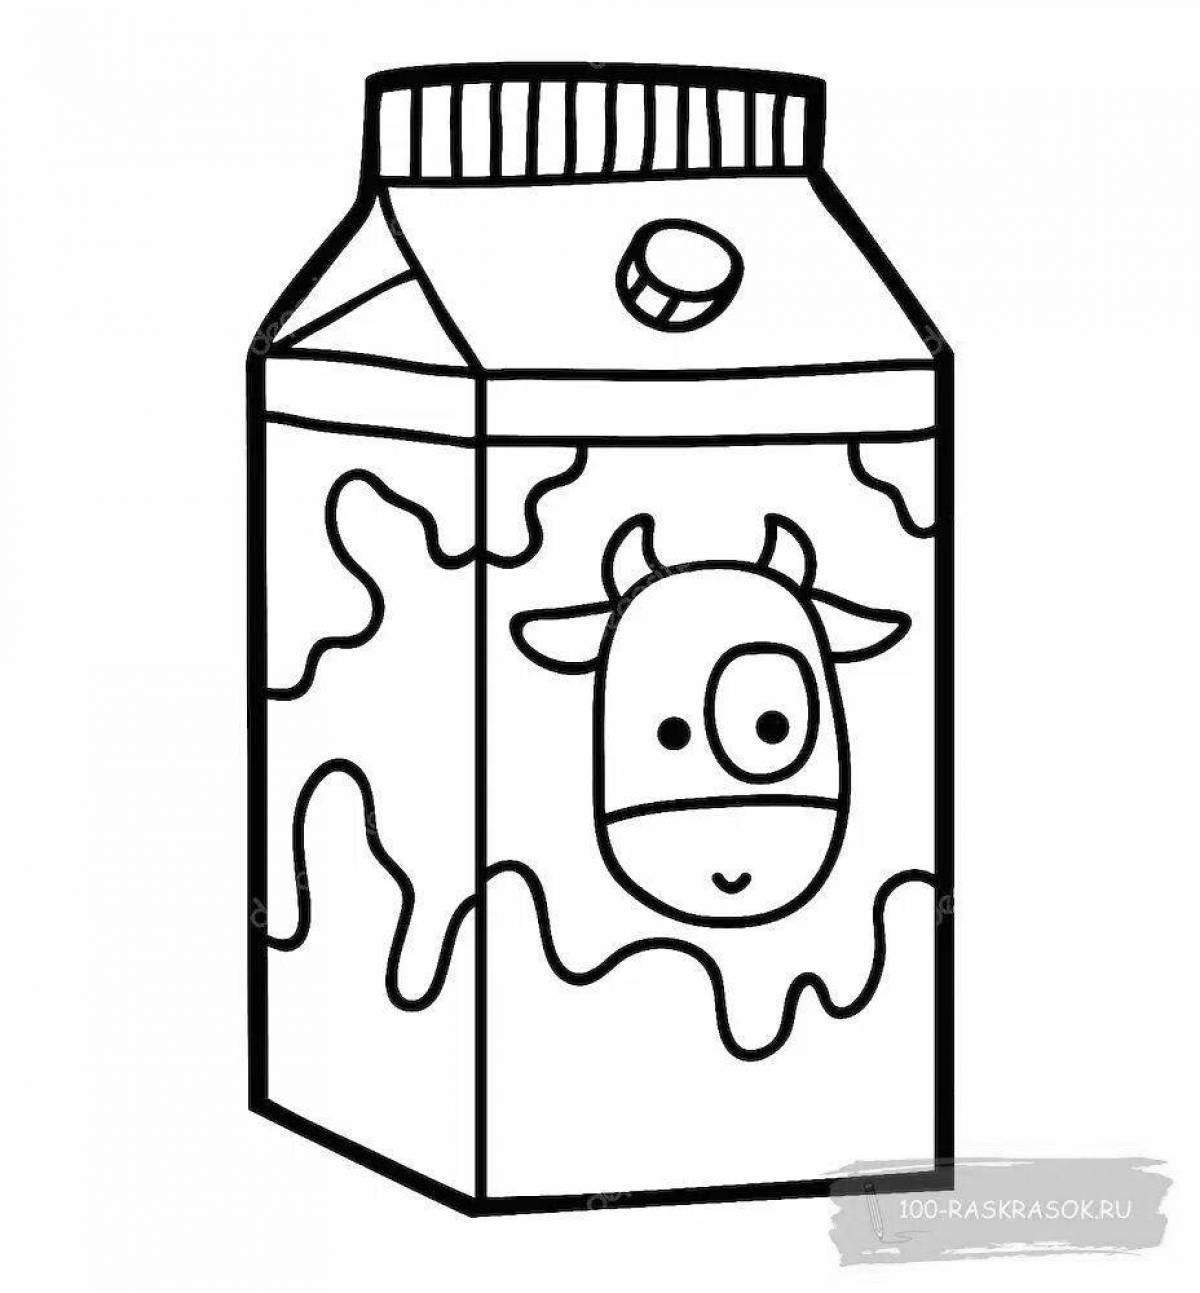 Coloring book happy milk for kids